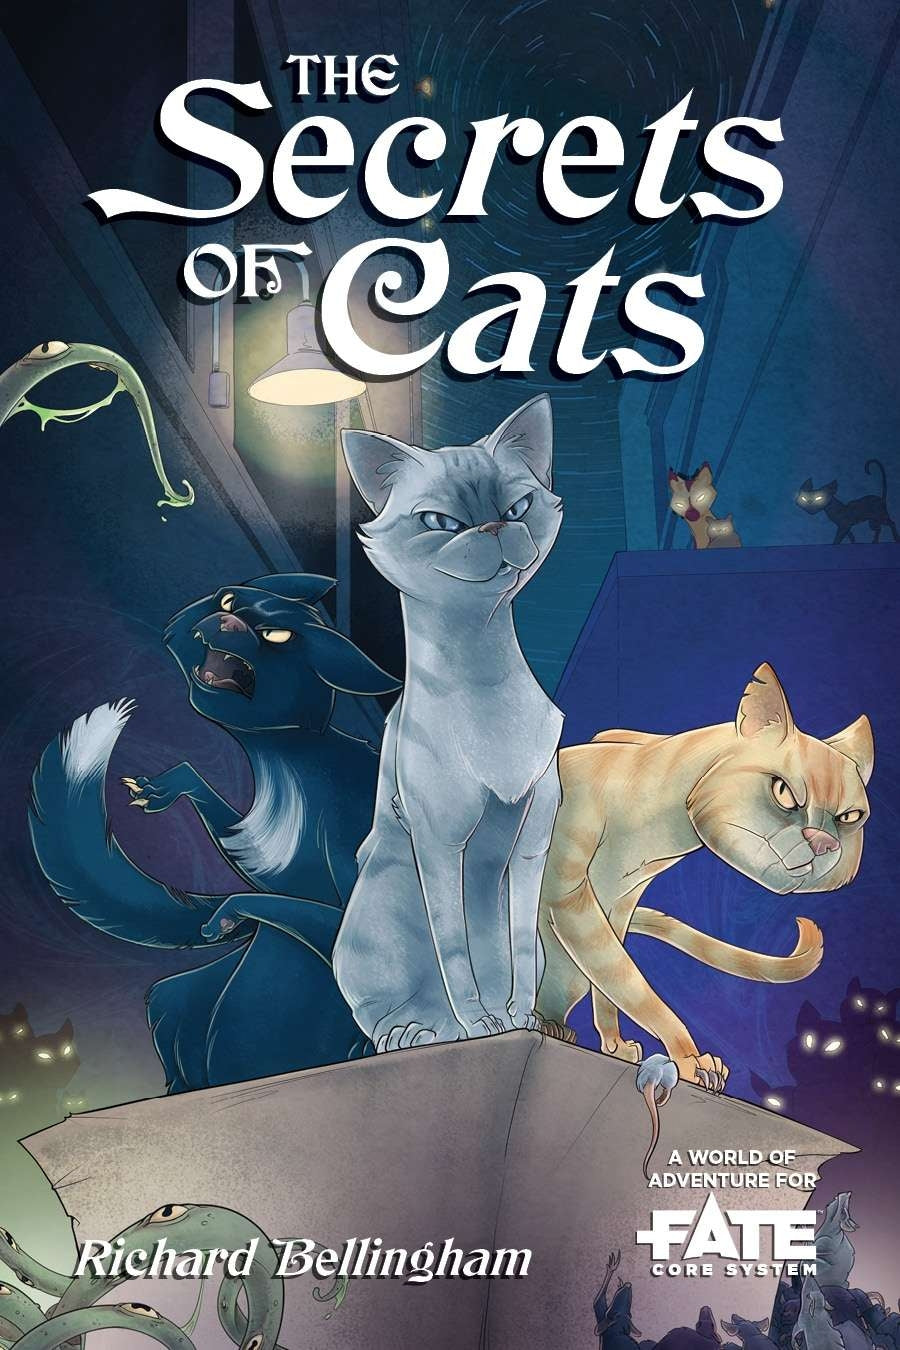 The Secret of Cats - Fate Core System